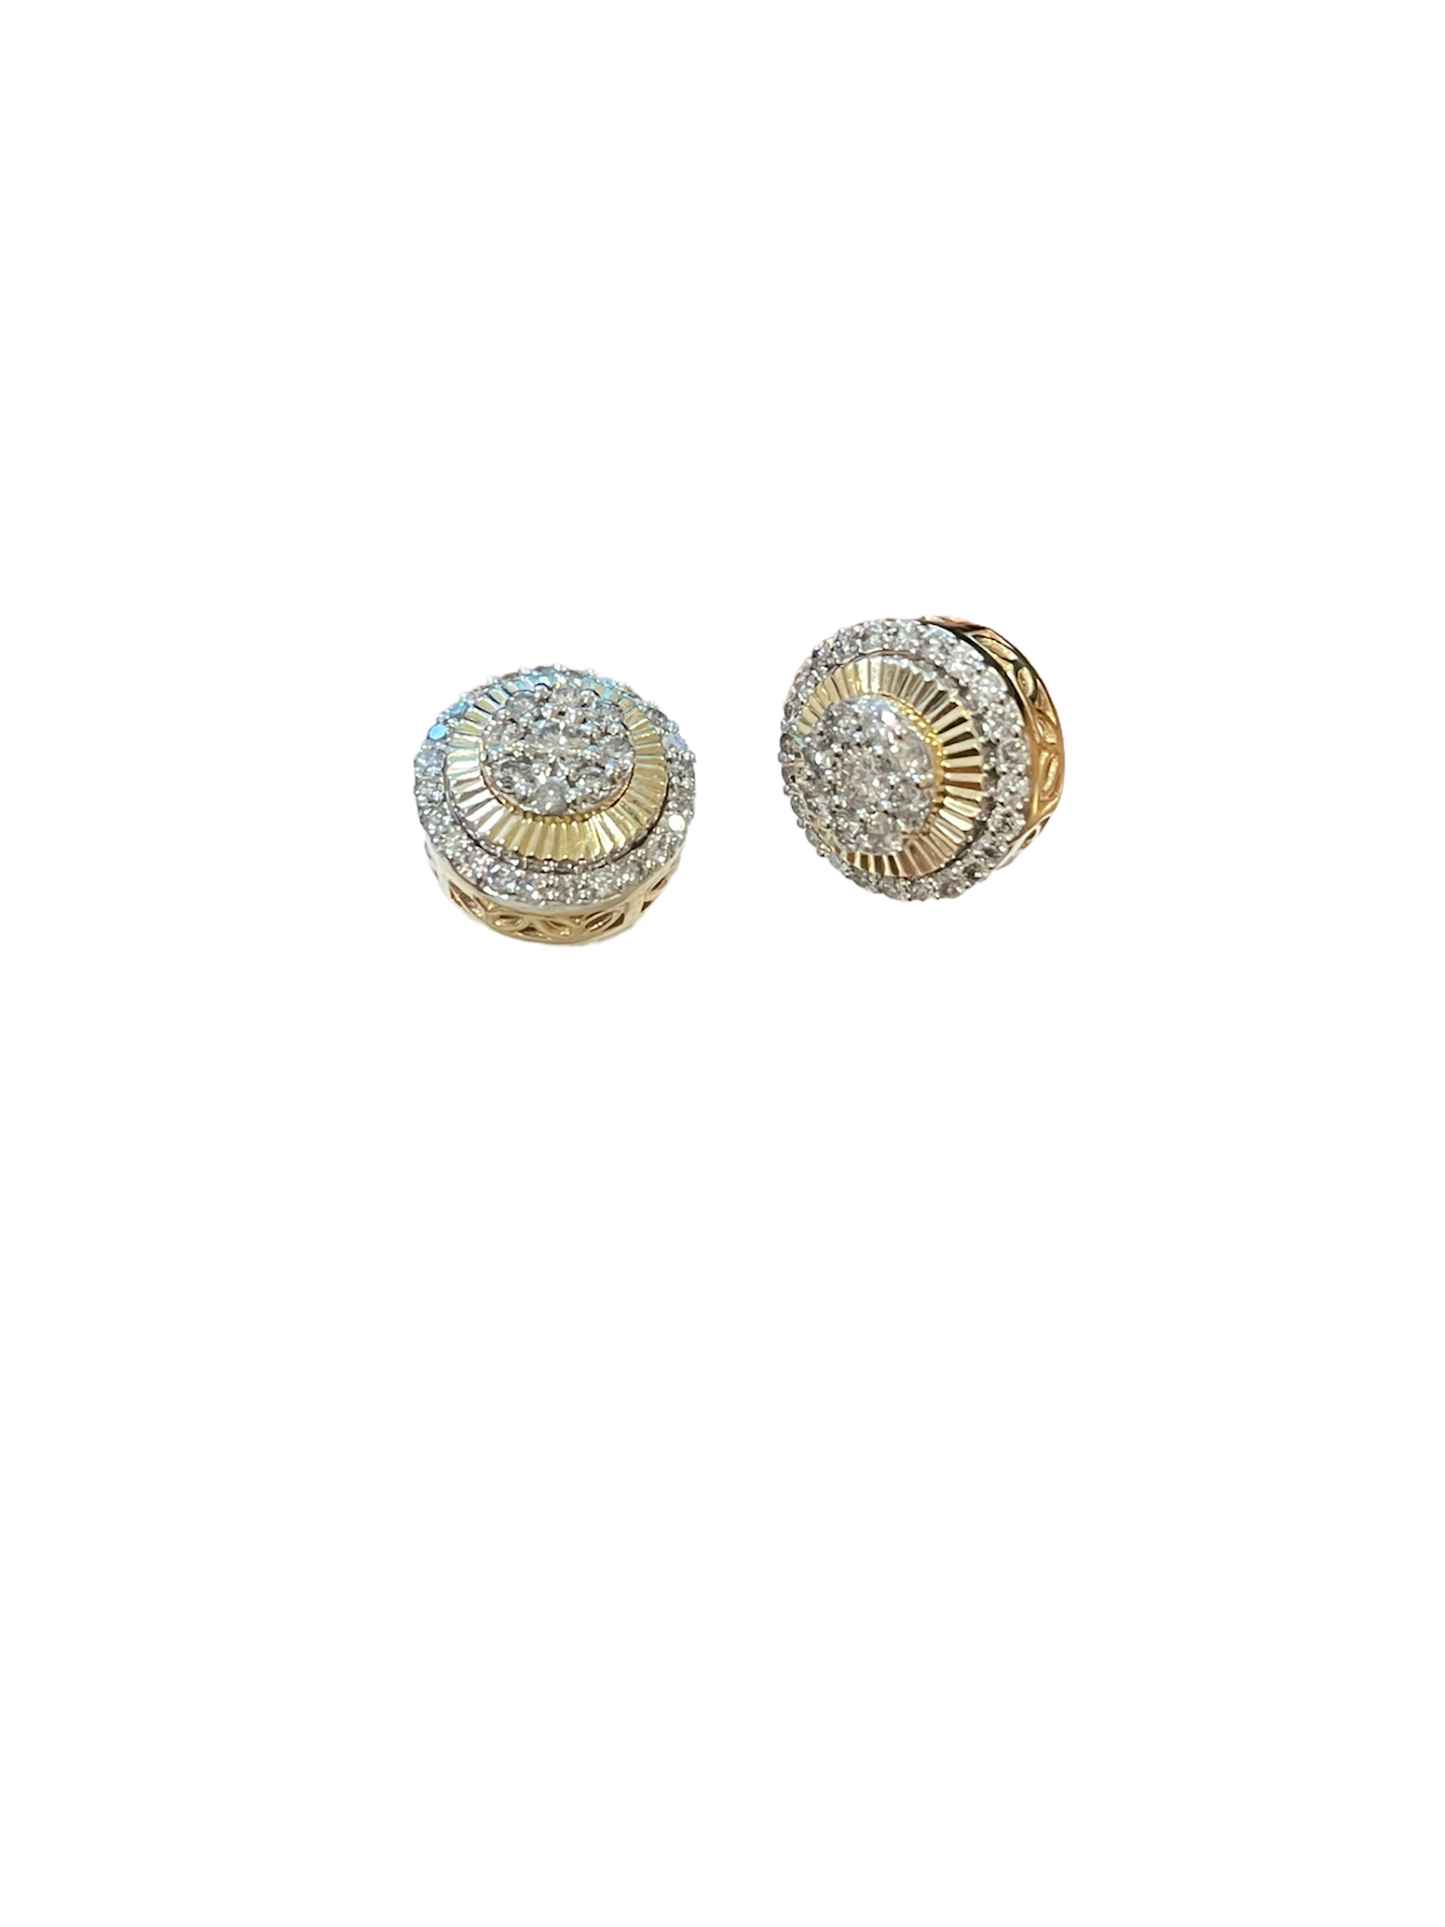 Men's Round Diamond Stud Earrings - 1.00 Carats in 10KT Yellow Gold